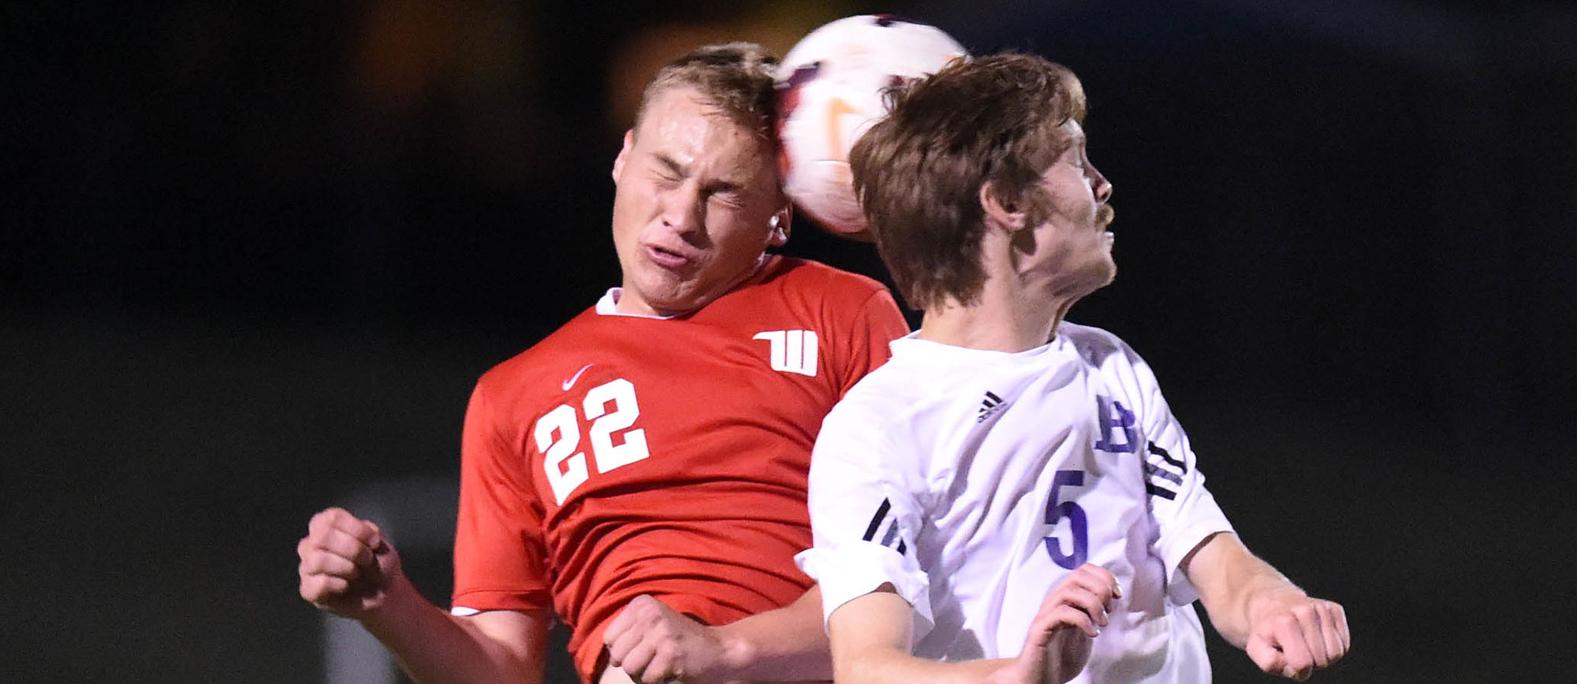 Samuel Archinal and the Tigers stifled Bluffton's offense in a 4-0 victory. Photo by Nick Falzerano